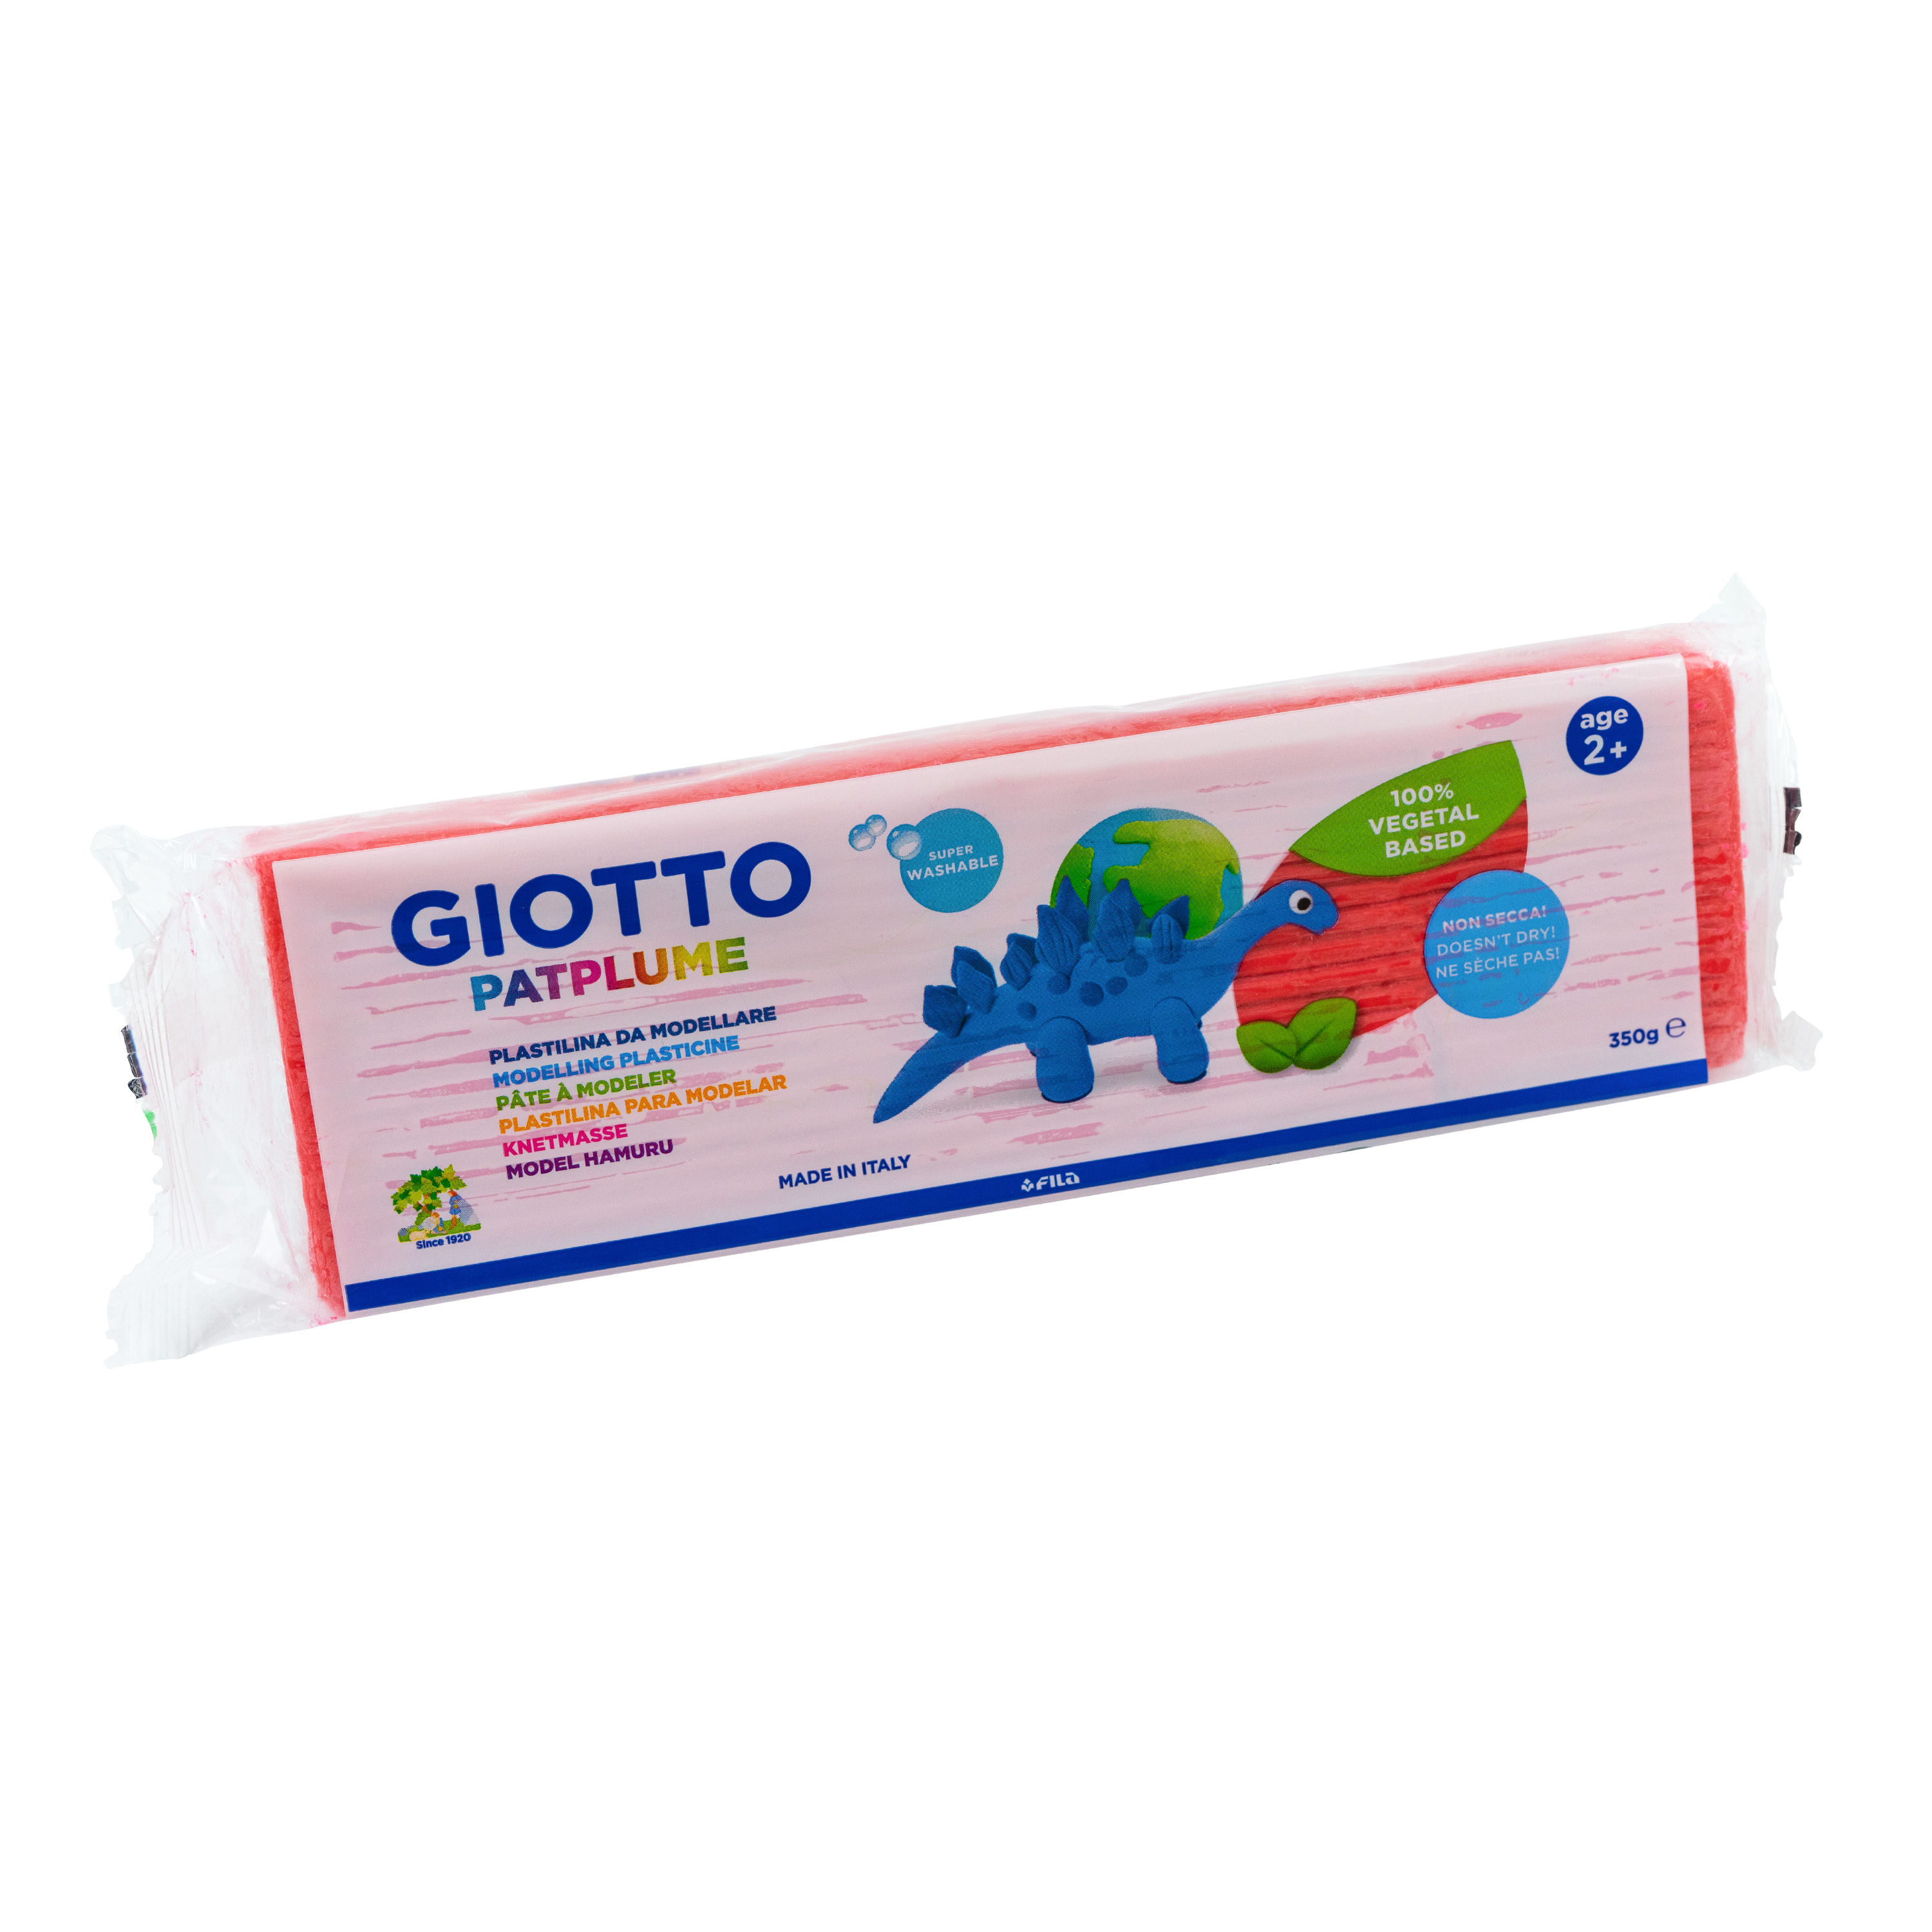 GIOTTO Patplume Modelliermasse 350 g, rot